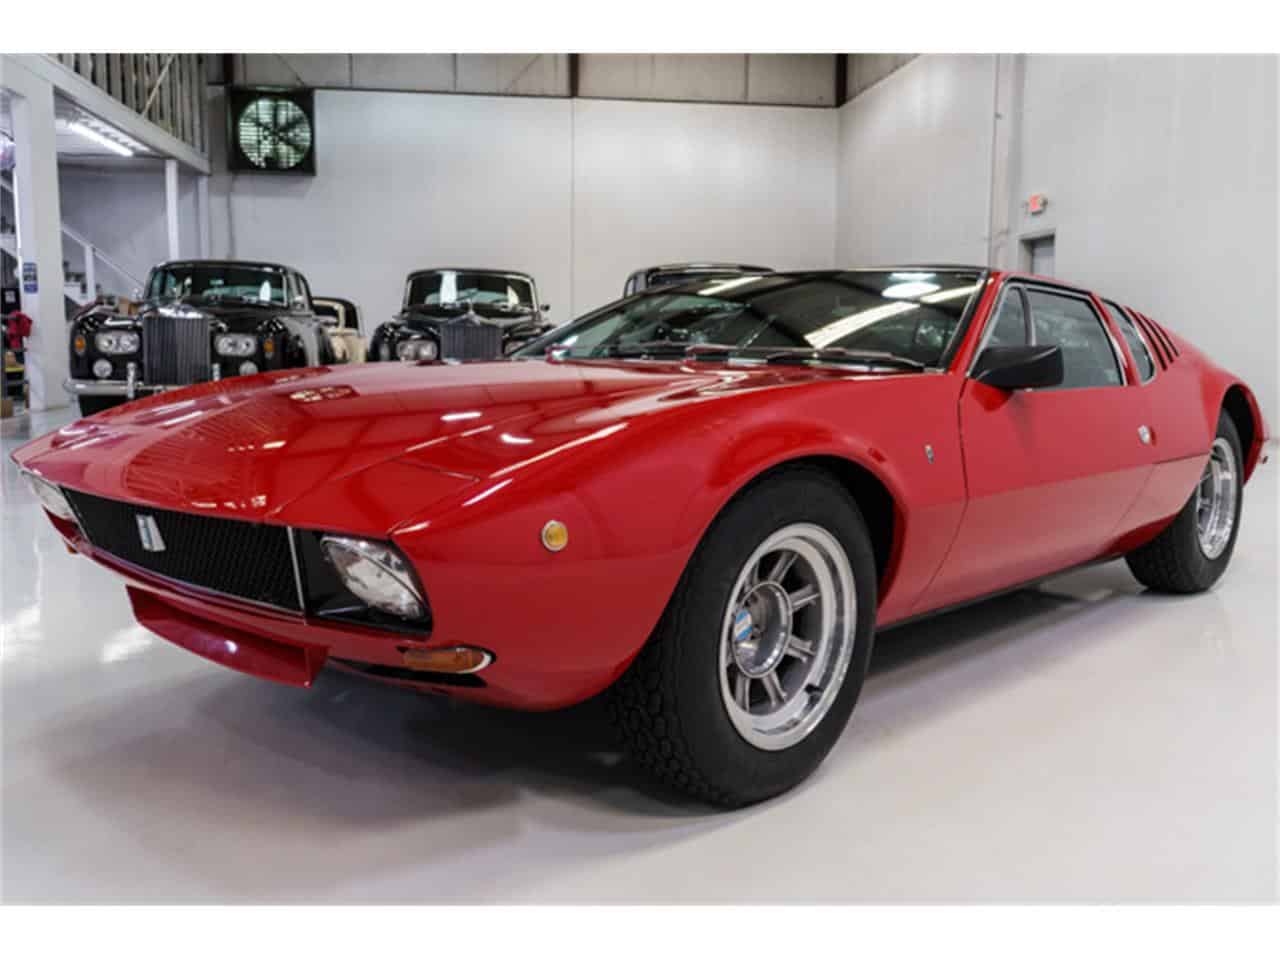 The De Tomaso Pantera is a mid-engine supercar powered by a V8